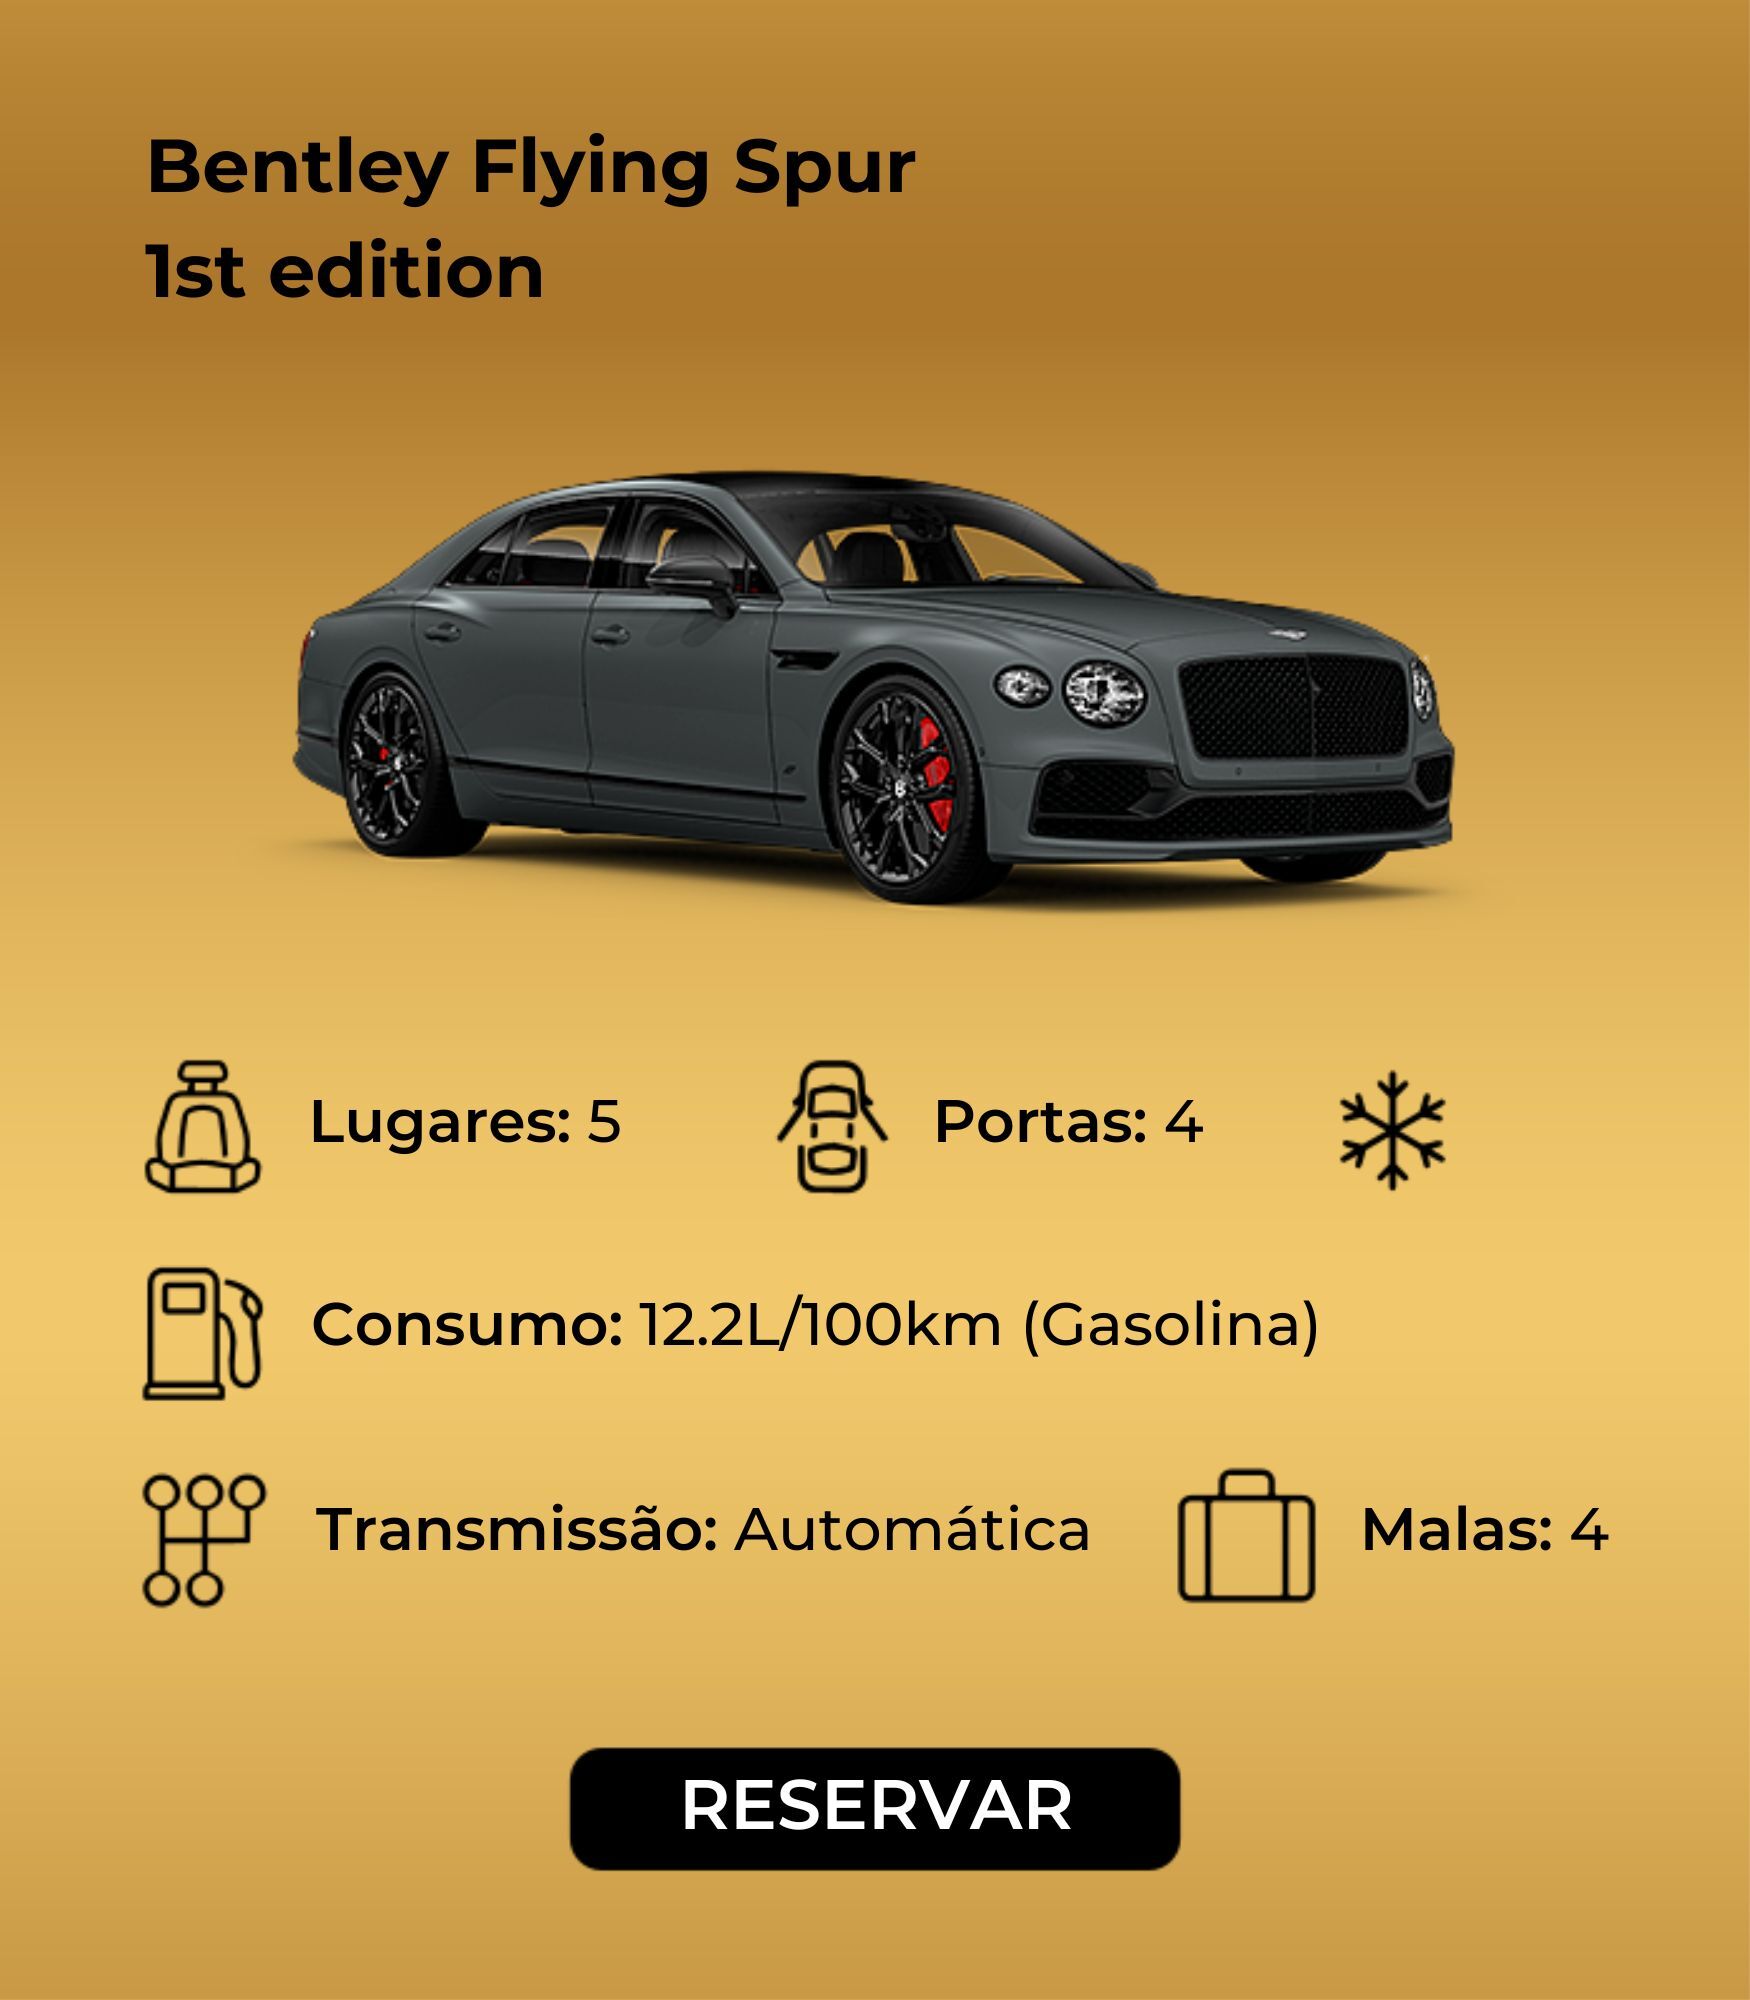 Bentley Flying Spur 1st edition